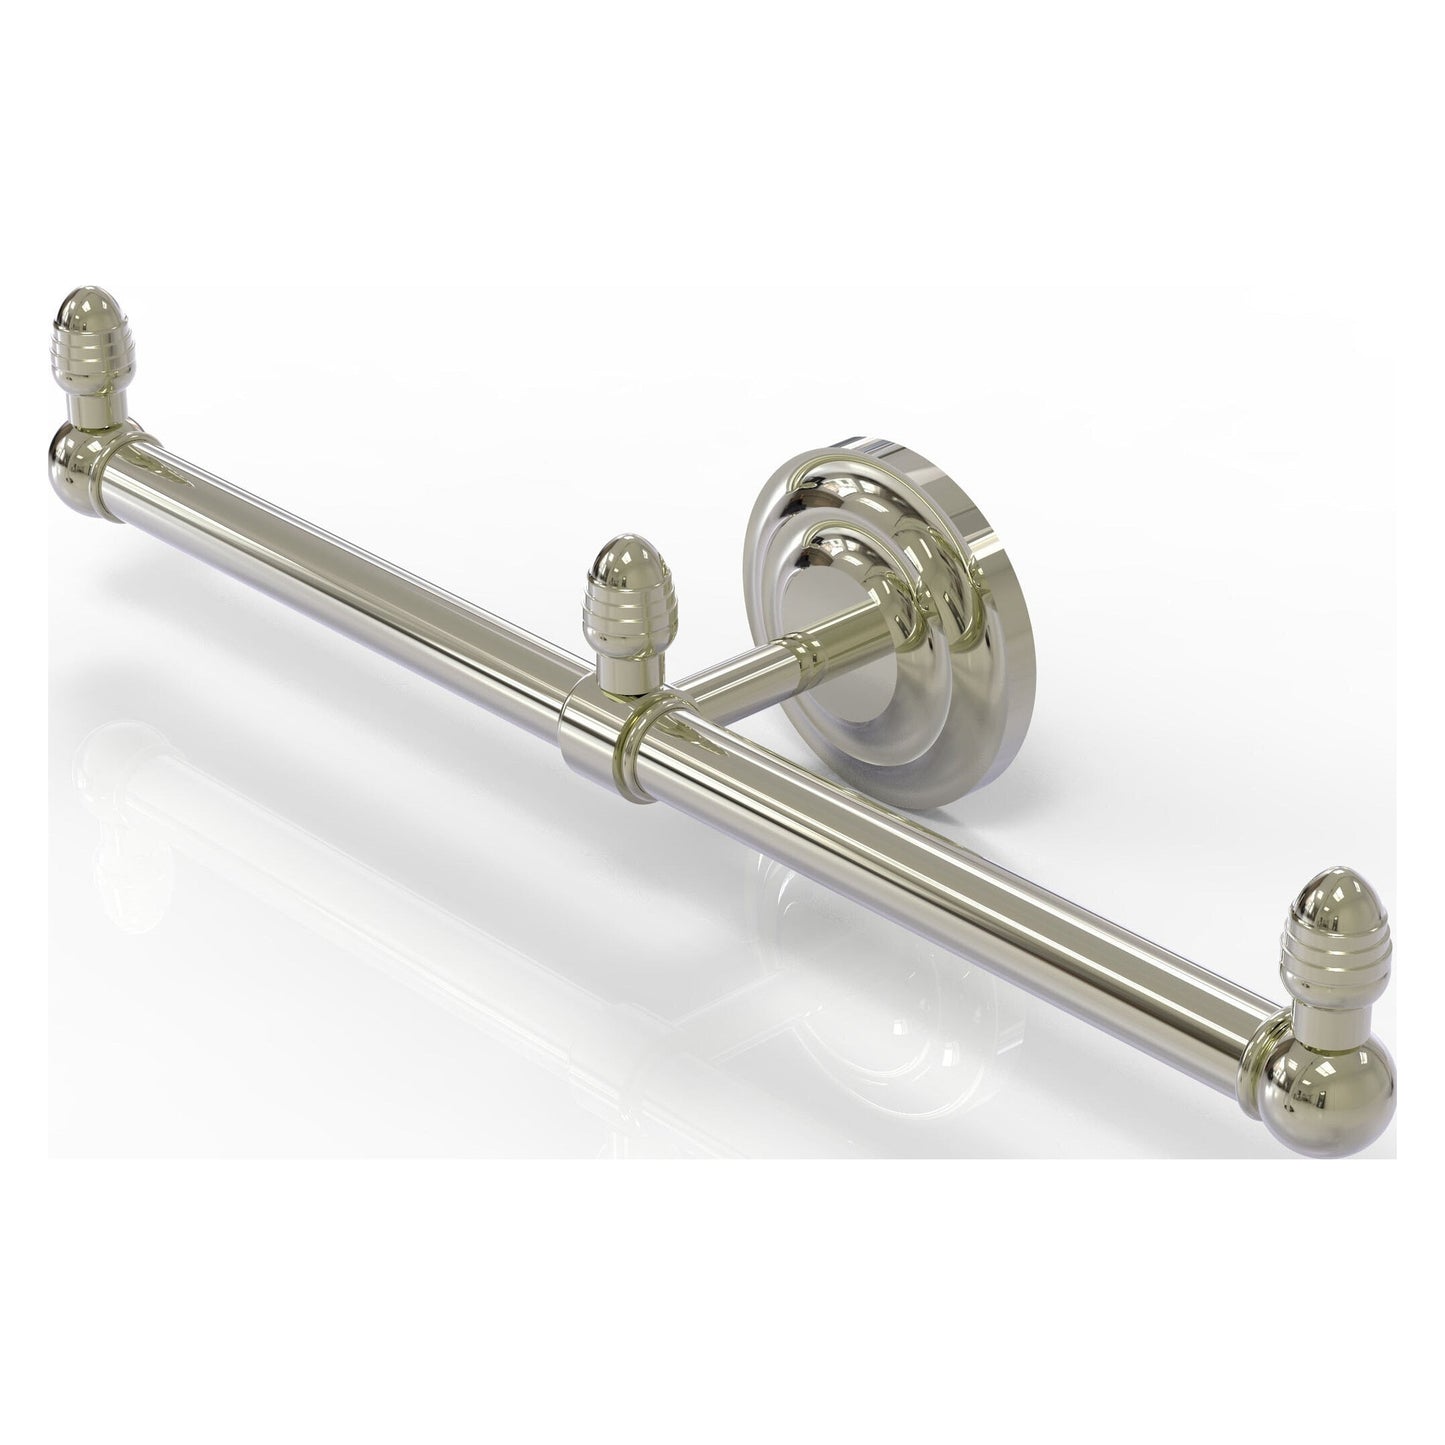 Allied Brass Que New 15.5" x 3.5" Polished Nickel Solid Brass 2-Arm Guest Towel Holder